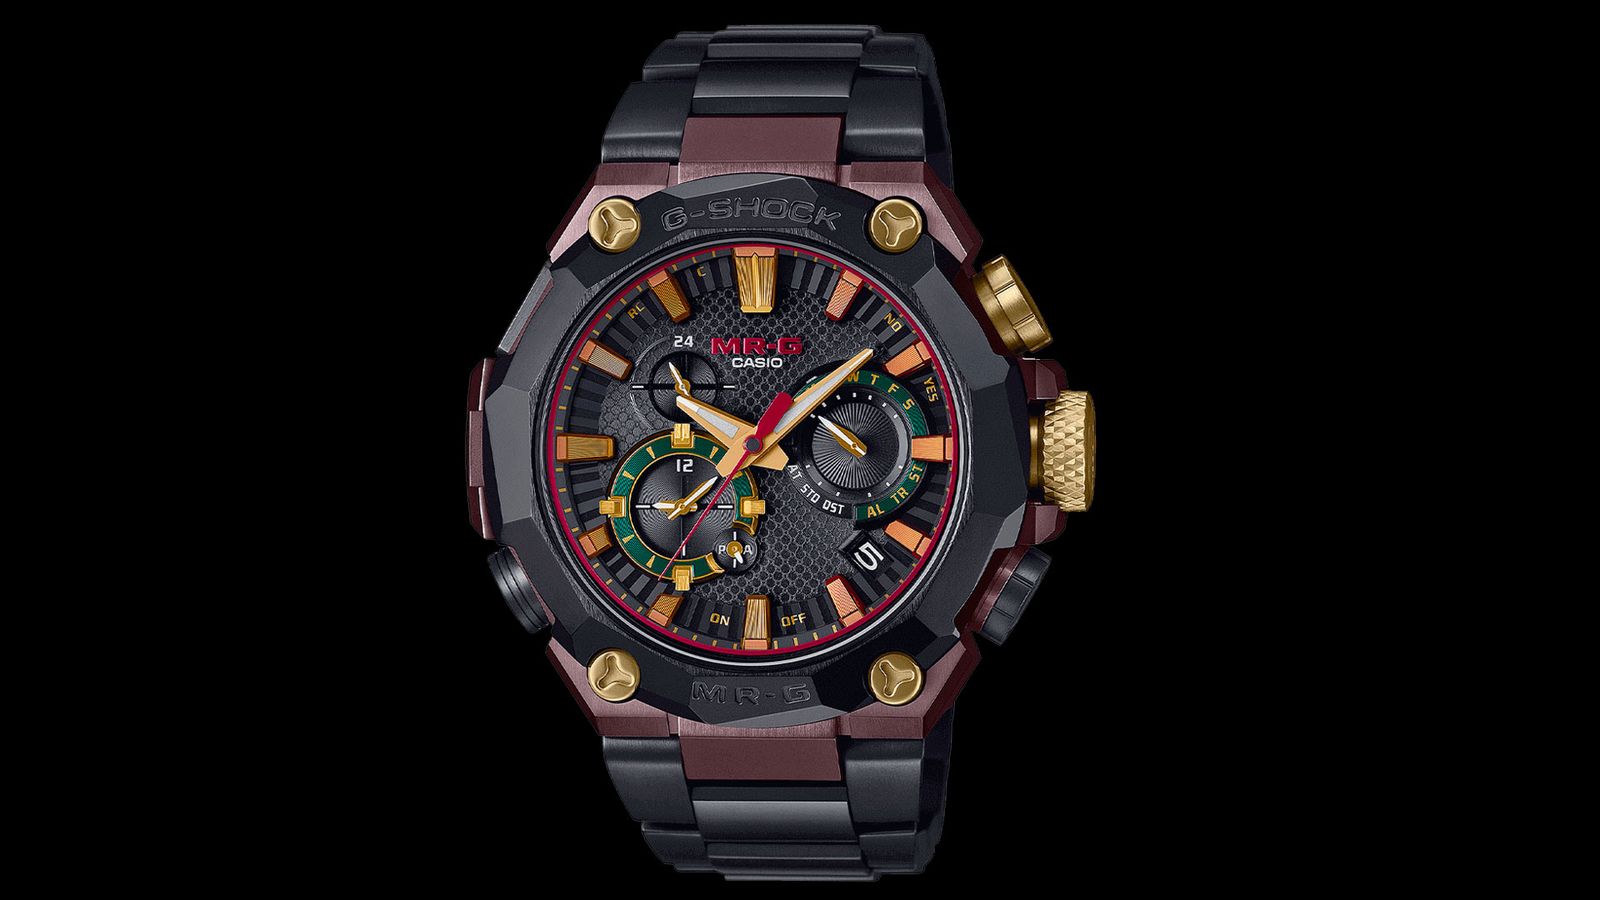 G-SHOCK Limited Edition MRG-B2000B-1A4DR product image of a black, burgundy, and gold titanium watch.